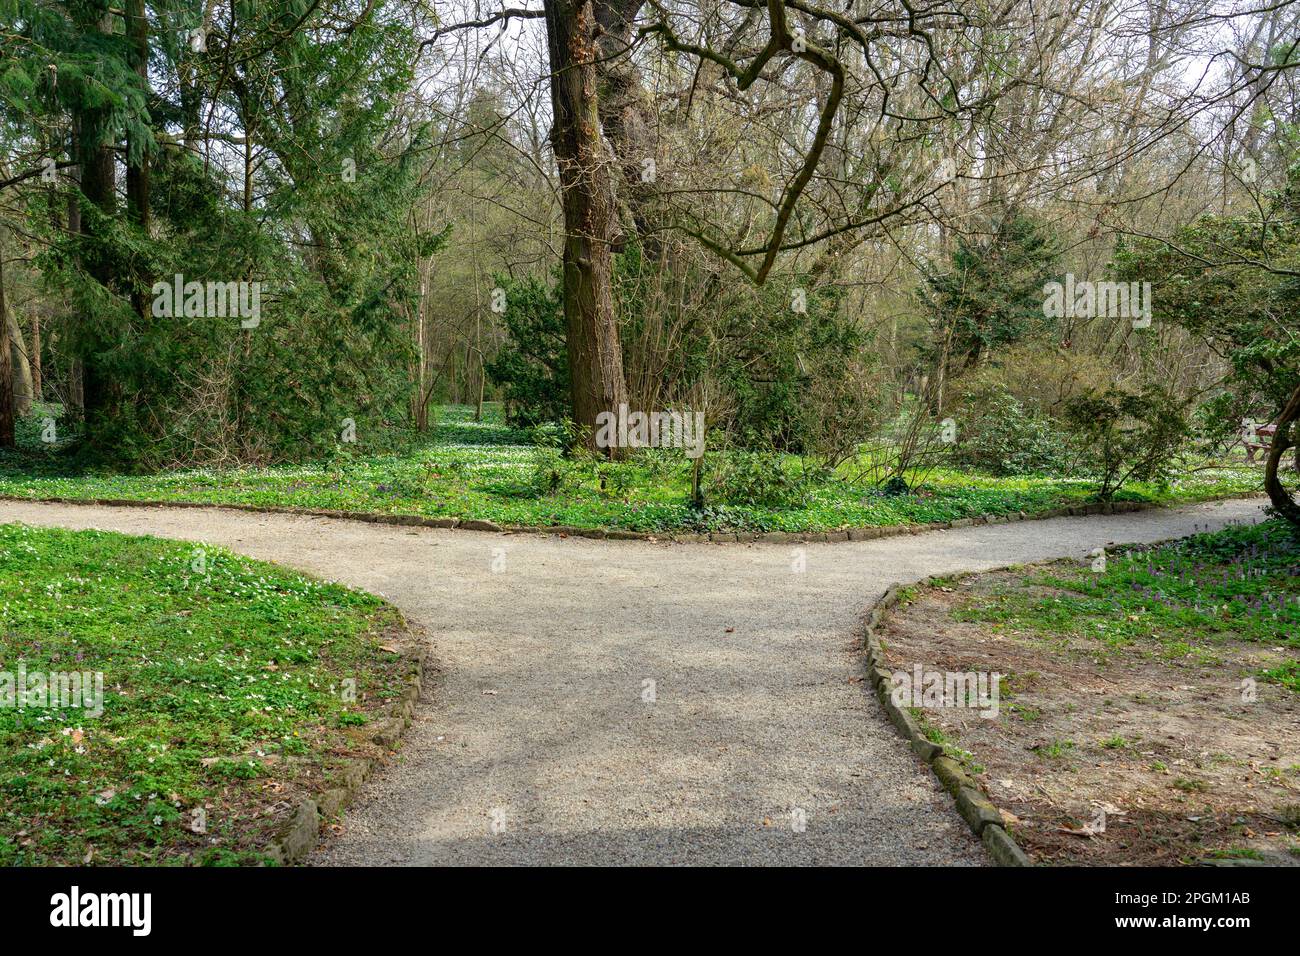 two paths in the nature decision concept in Sarvar arboretum early spring time with wild flowers . Stock Photo